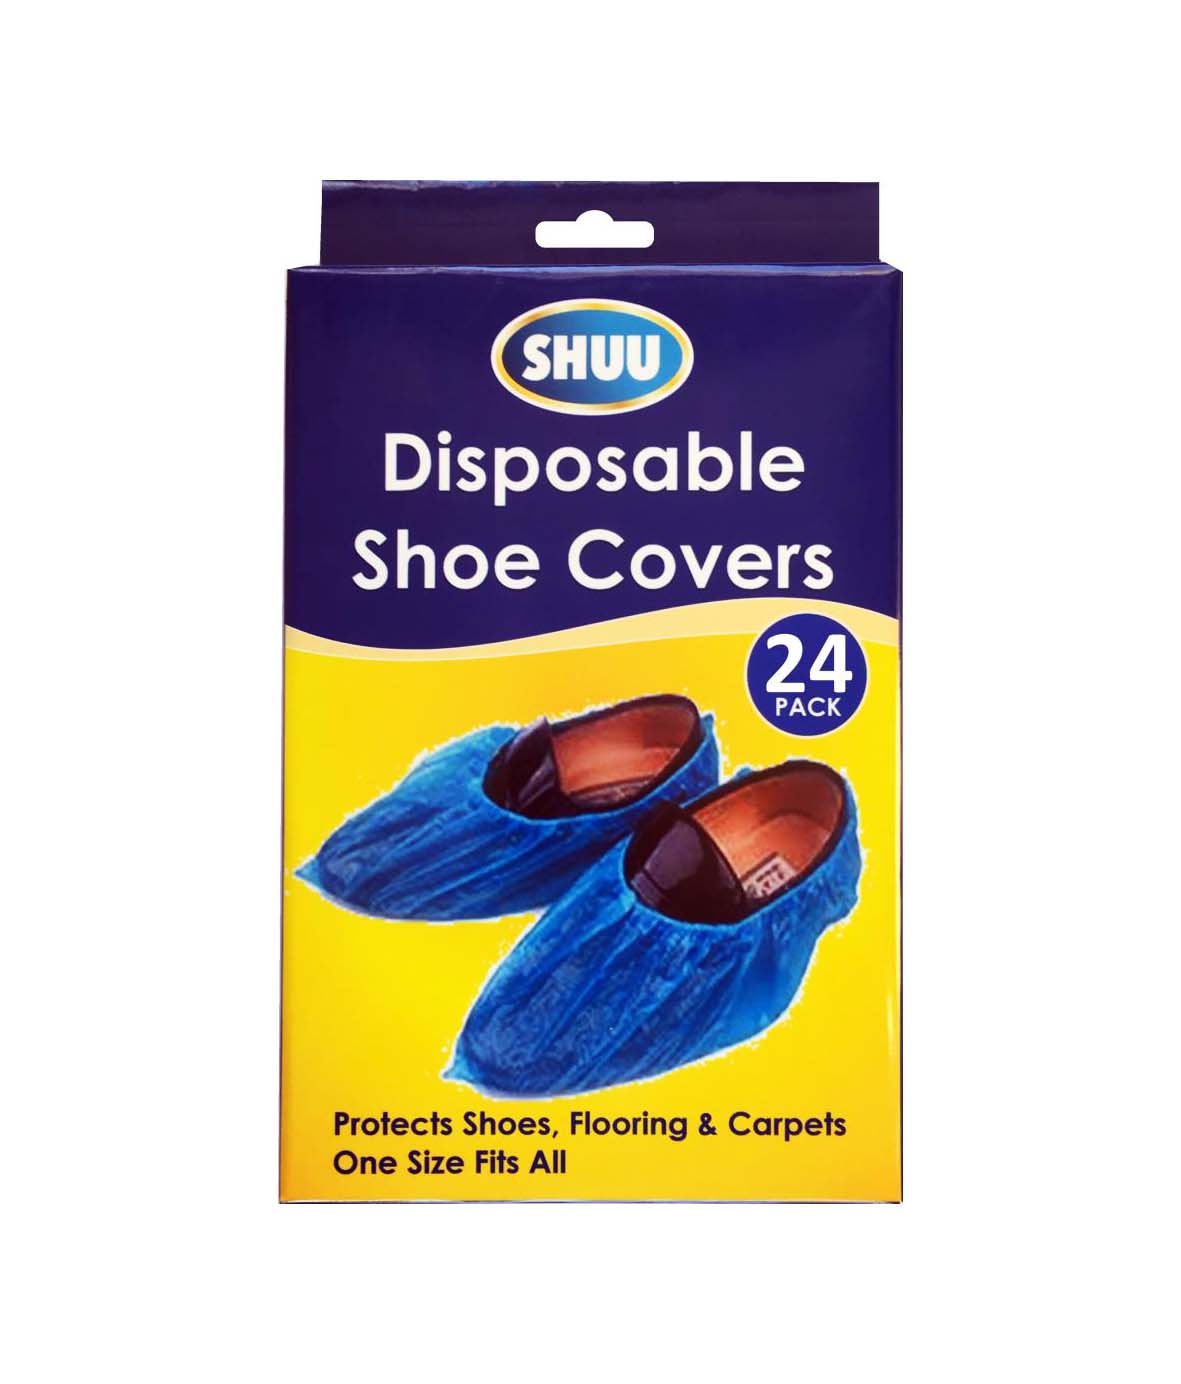 SHUU Disposable Shoe Protective Covers Safety Plastic Boots/Trainers Covers 24 Pack 2703 (Parcel Rate)